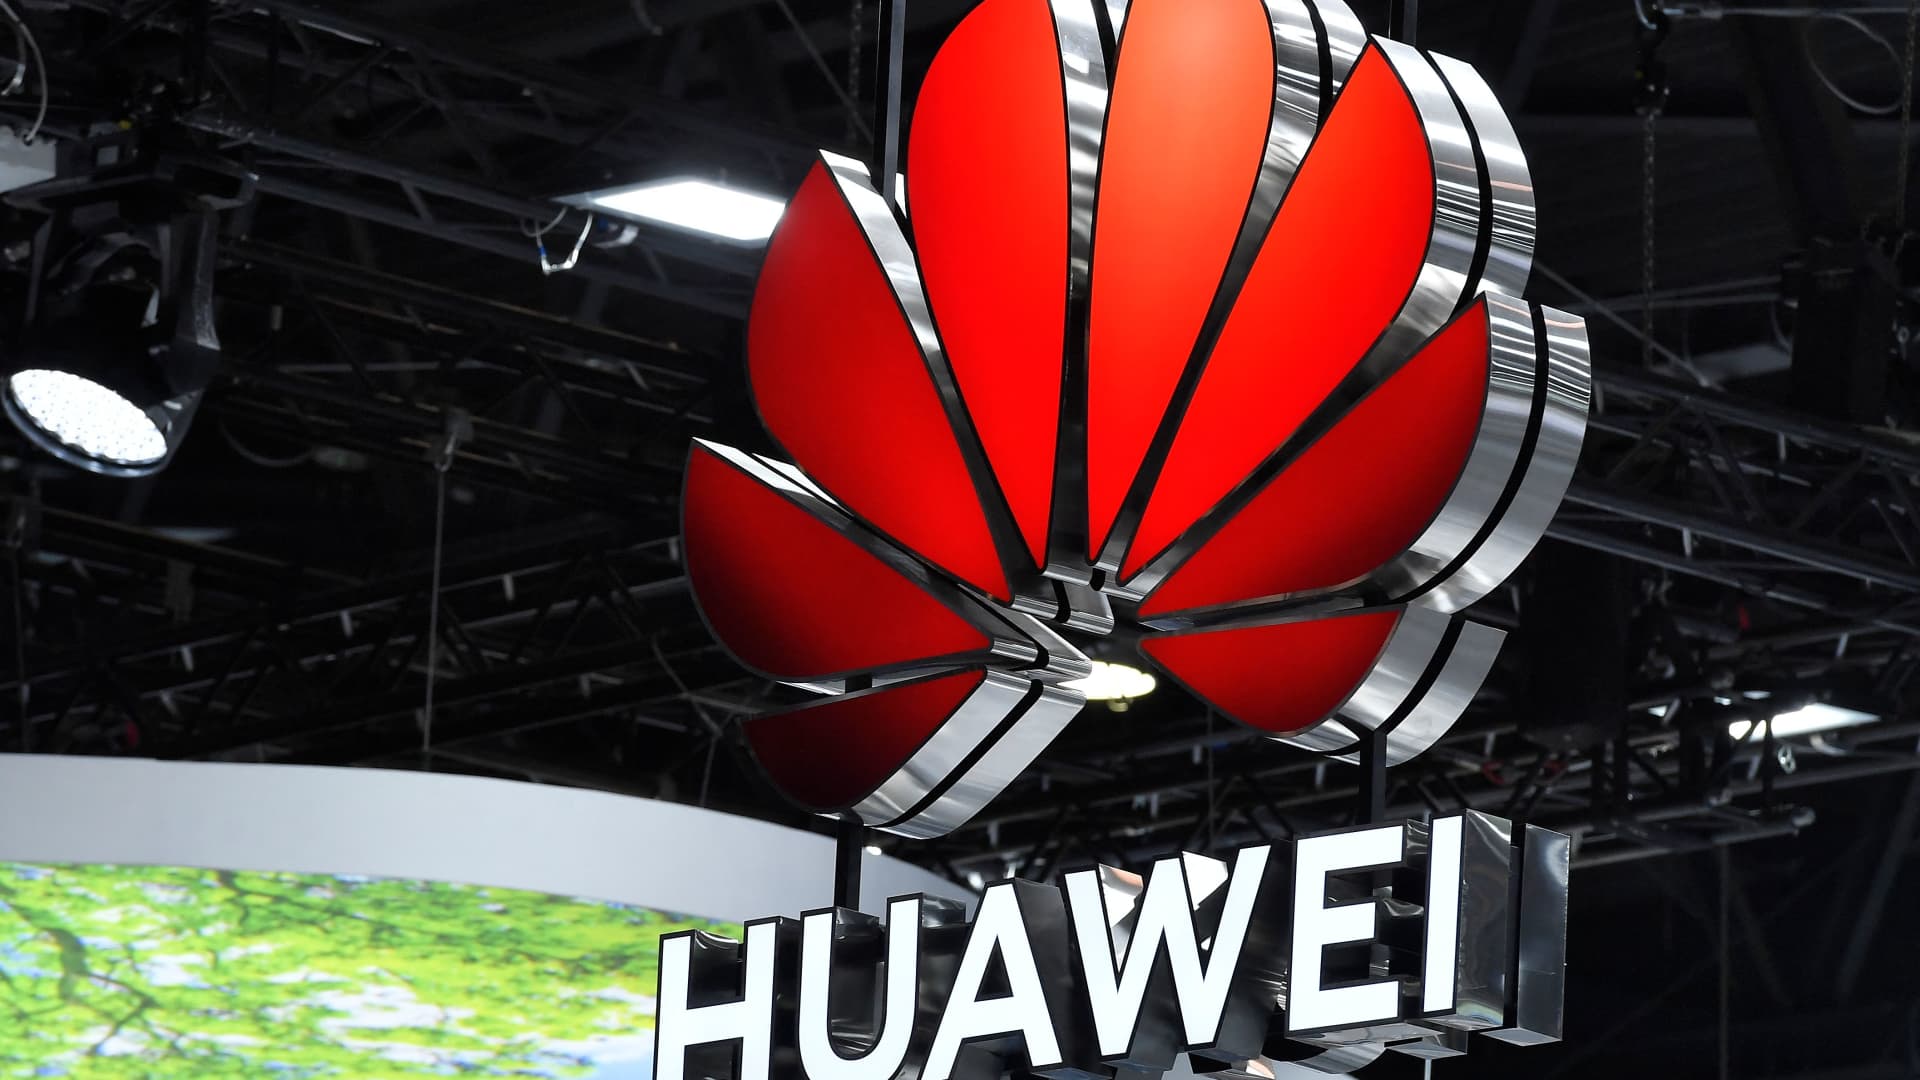 Seagate hit with $300 million penalty for continuing $1 billion relationship with blacklisted firm Huawei, despite U.S. export controls